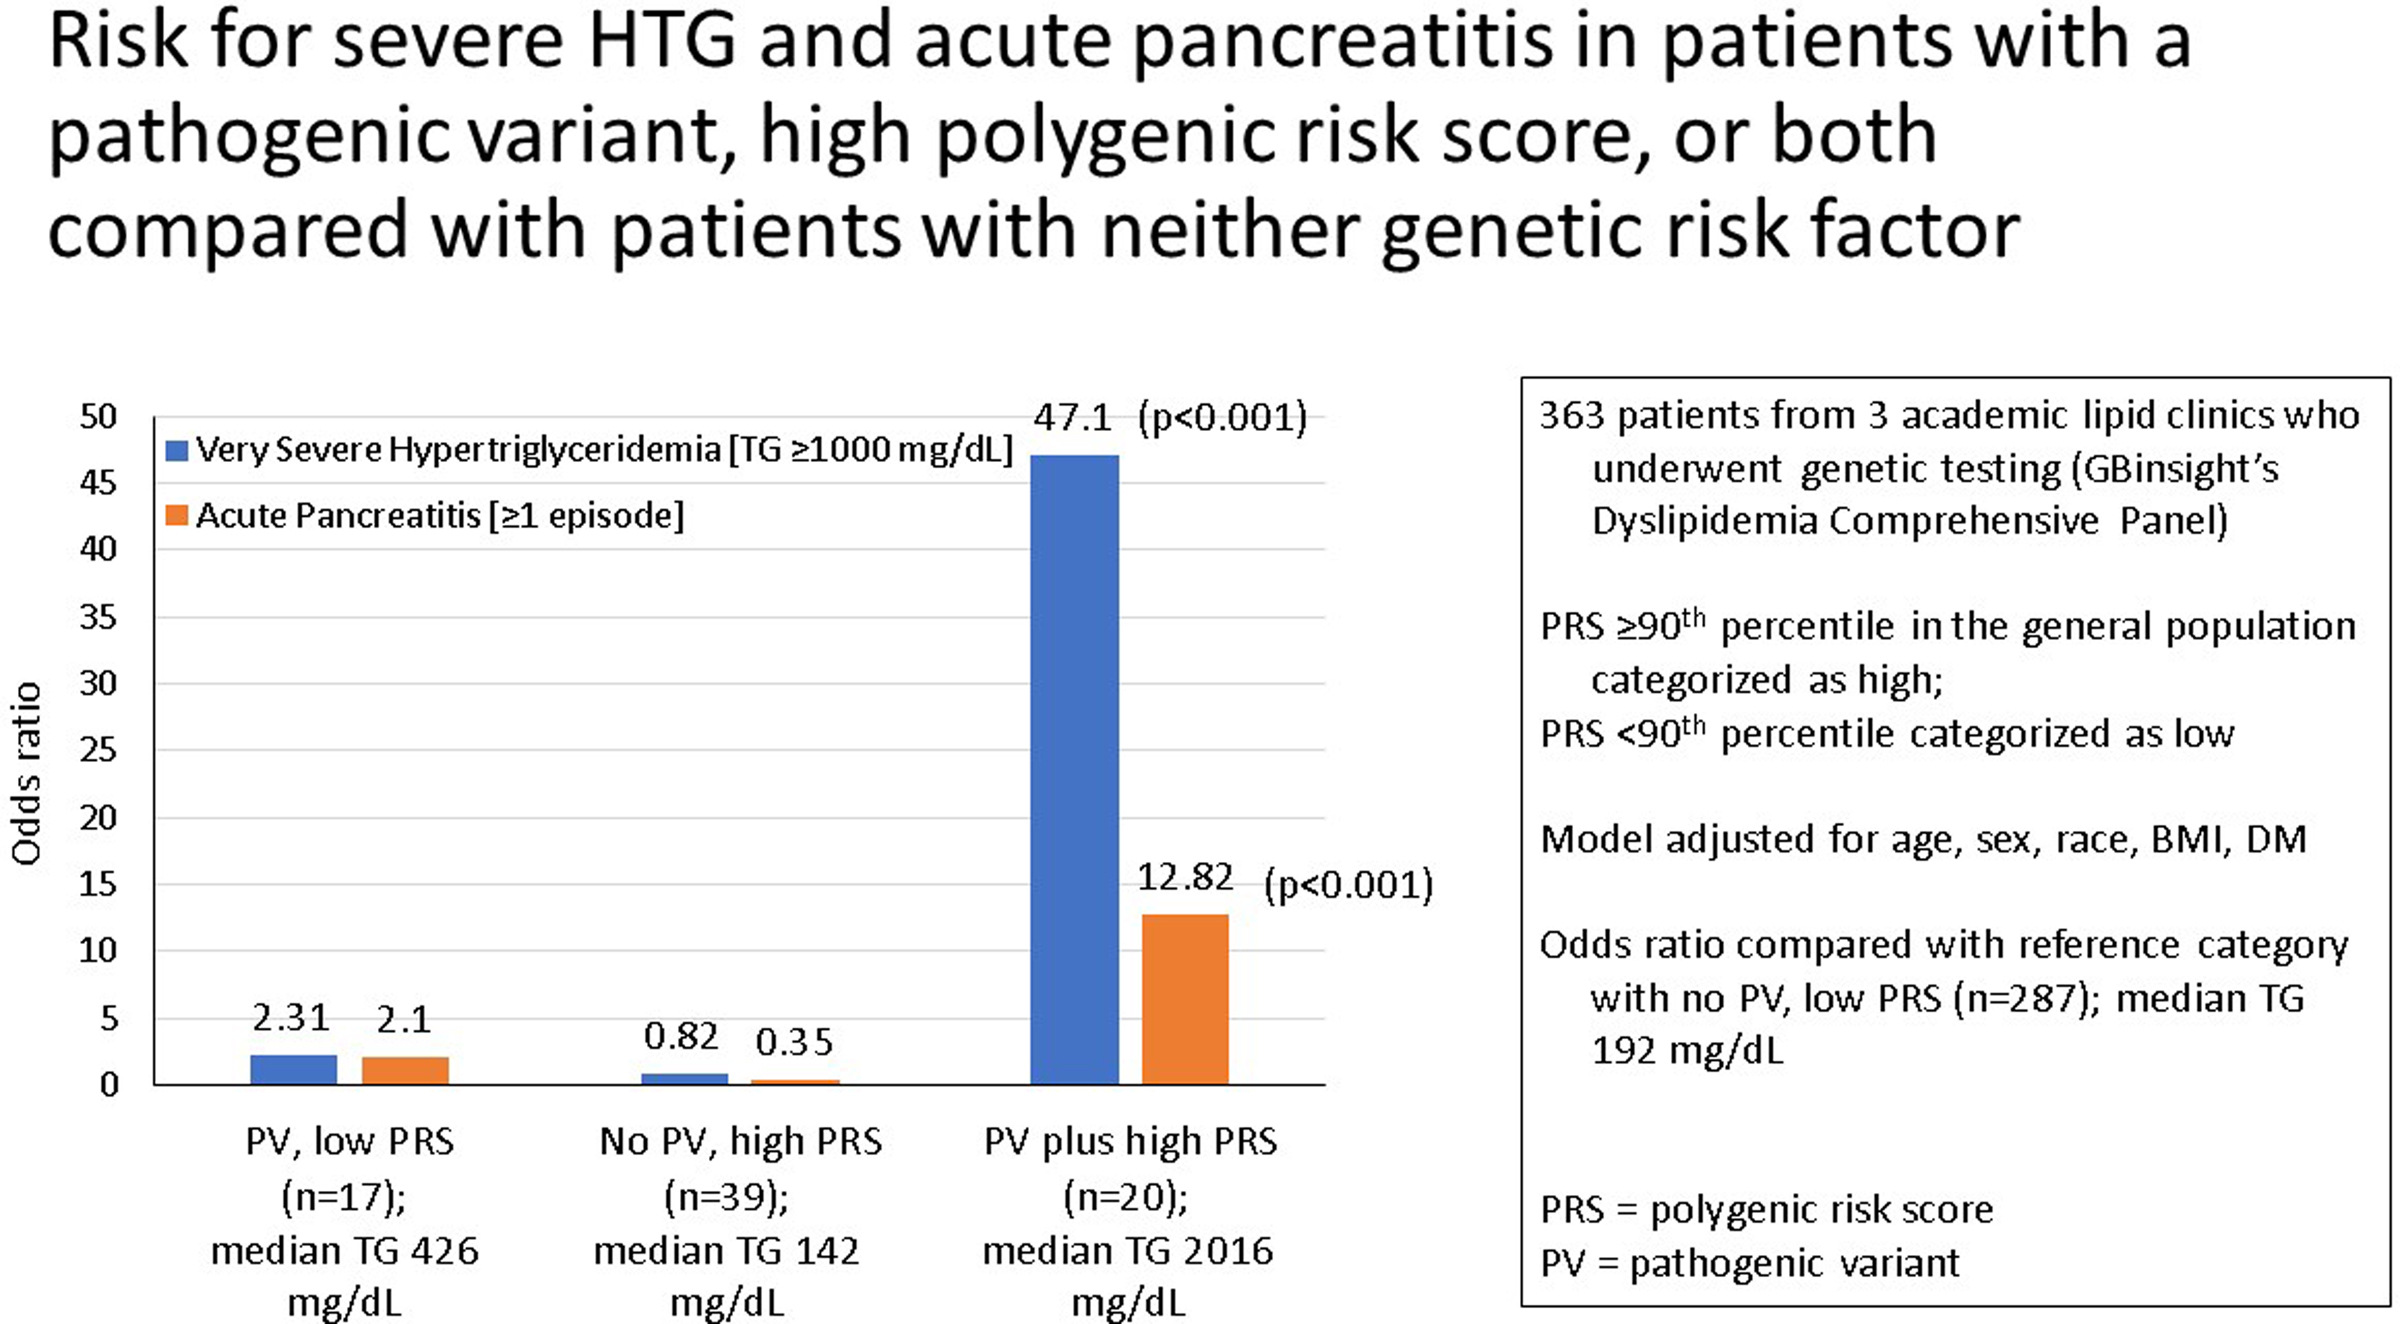 Genetic Testing for Hypertriglyceridemia in Academic Lipid Clinics: Implications for Precision Medicine—Brief Report